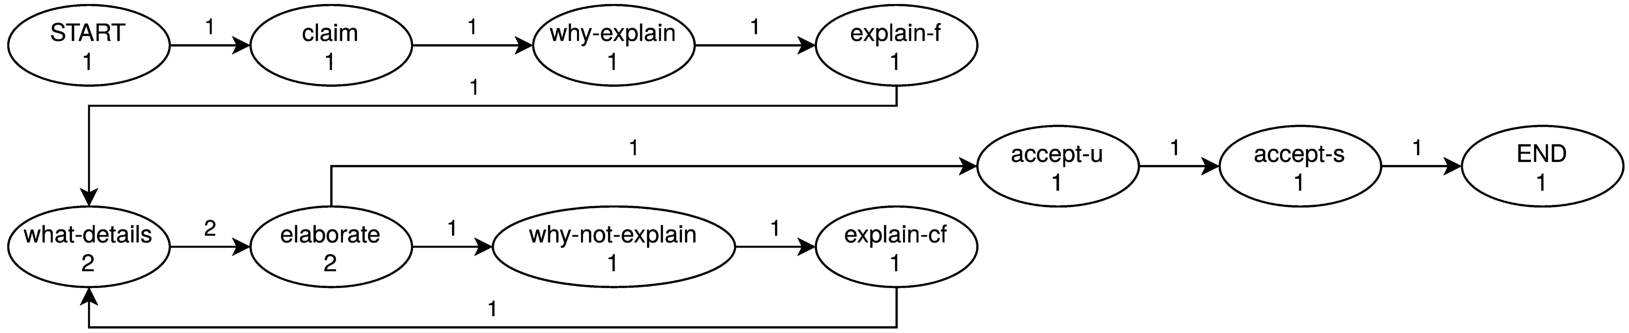 The graphical view of the process model corresponding to the example Dialogue1 in Table 4.